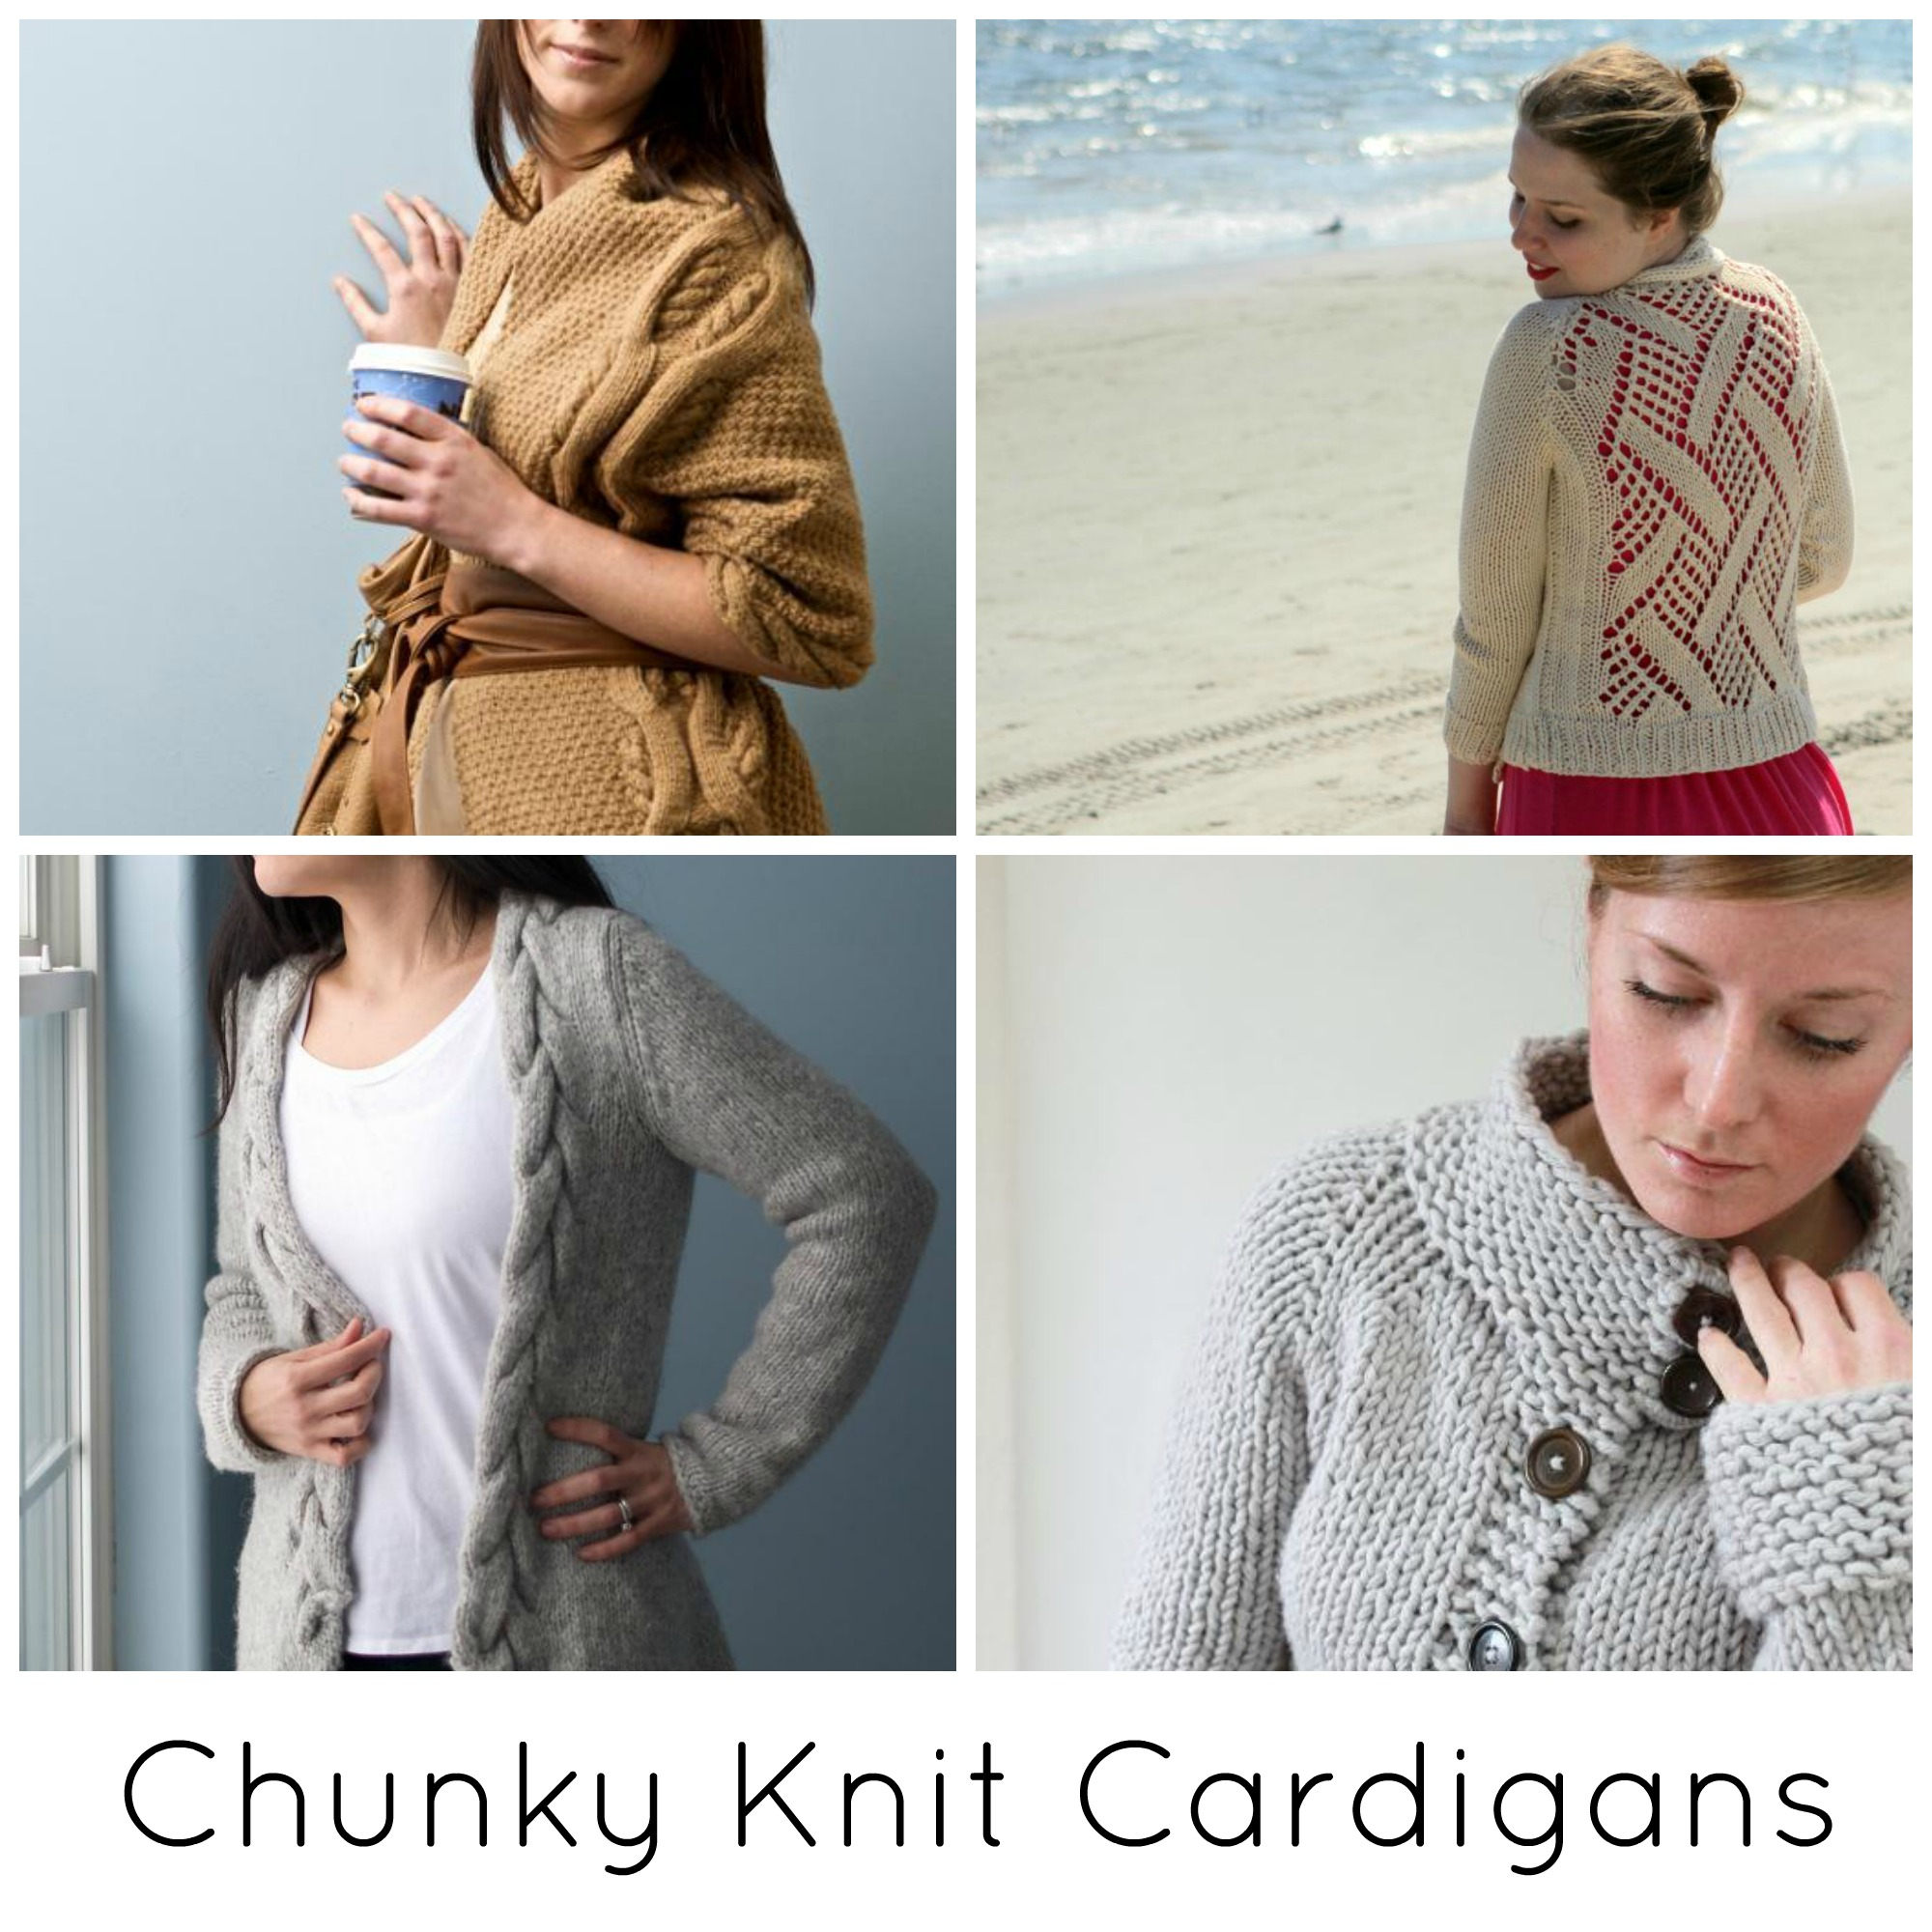 Free Knitting Pattern Sweater The Coziest Chunky Knit Cardigan Patterns Ever